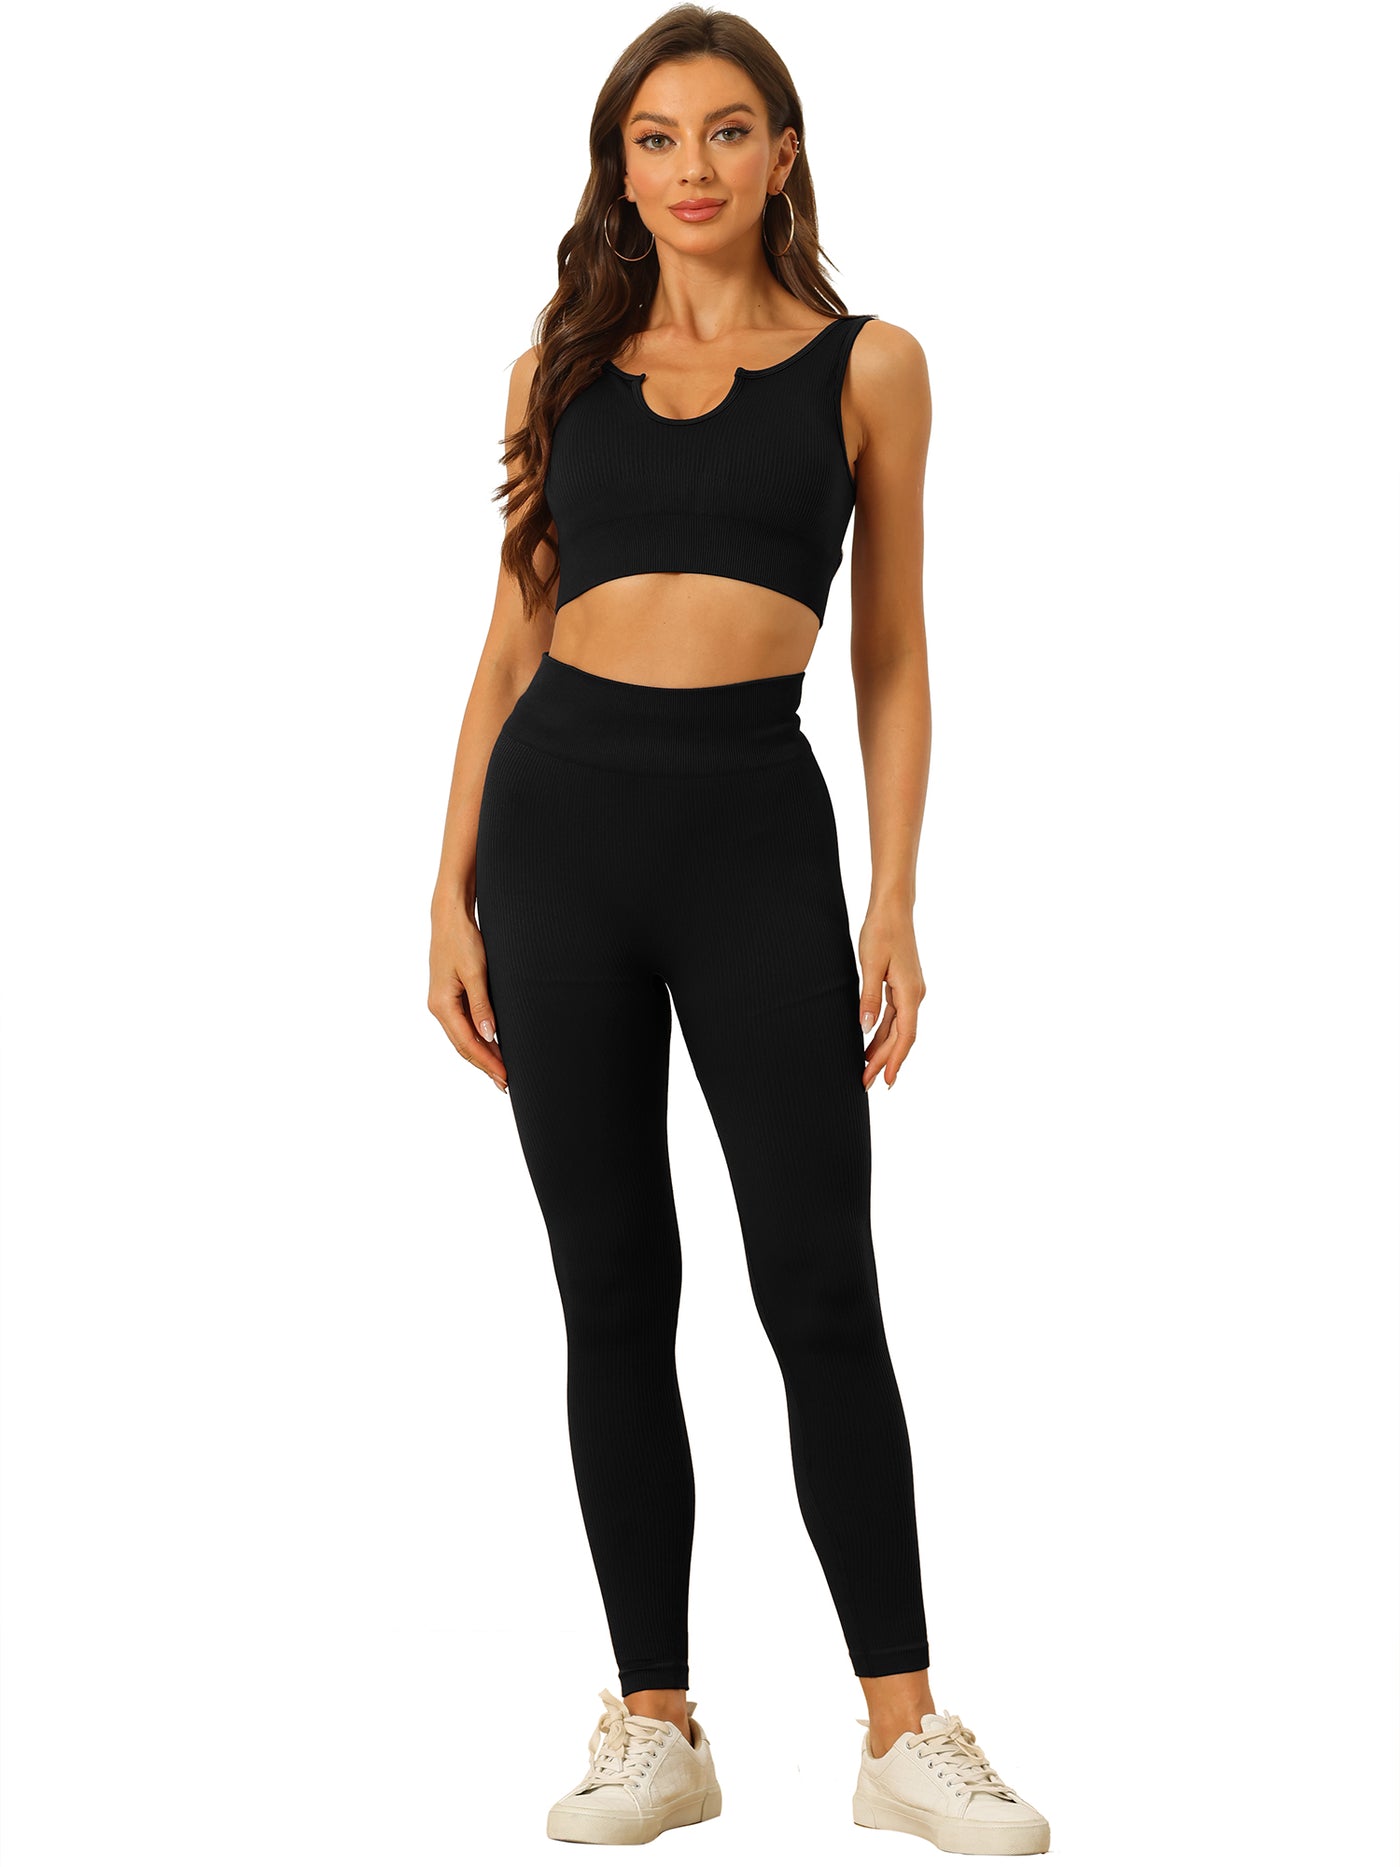 Allegra K 2 Piece Seamless Ribbed Sports Bra and High Waisted Leggings Workout Set